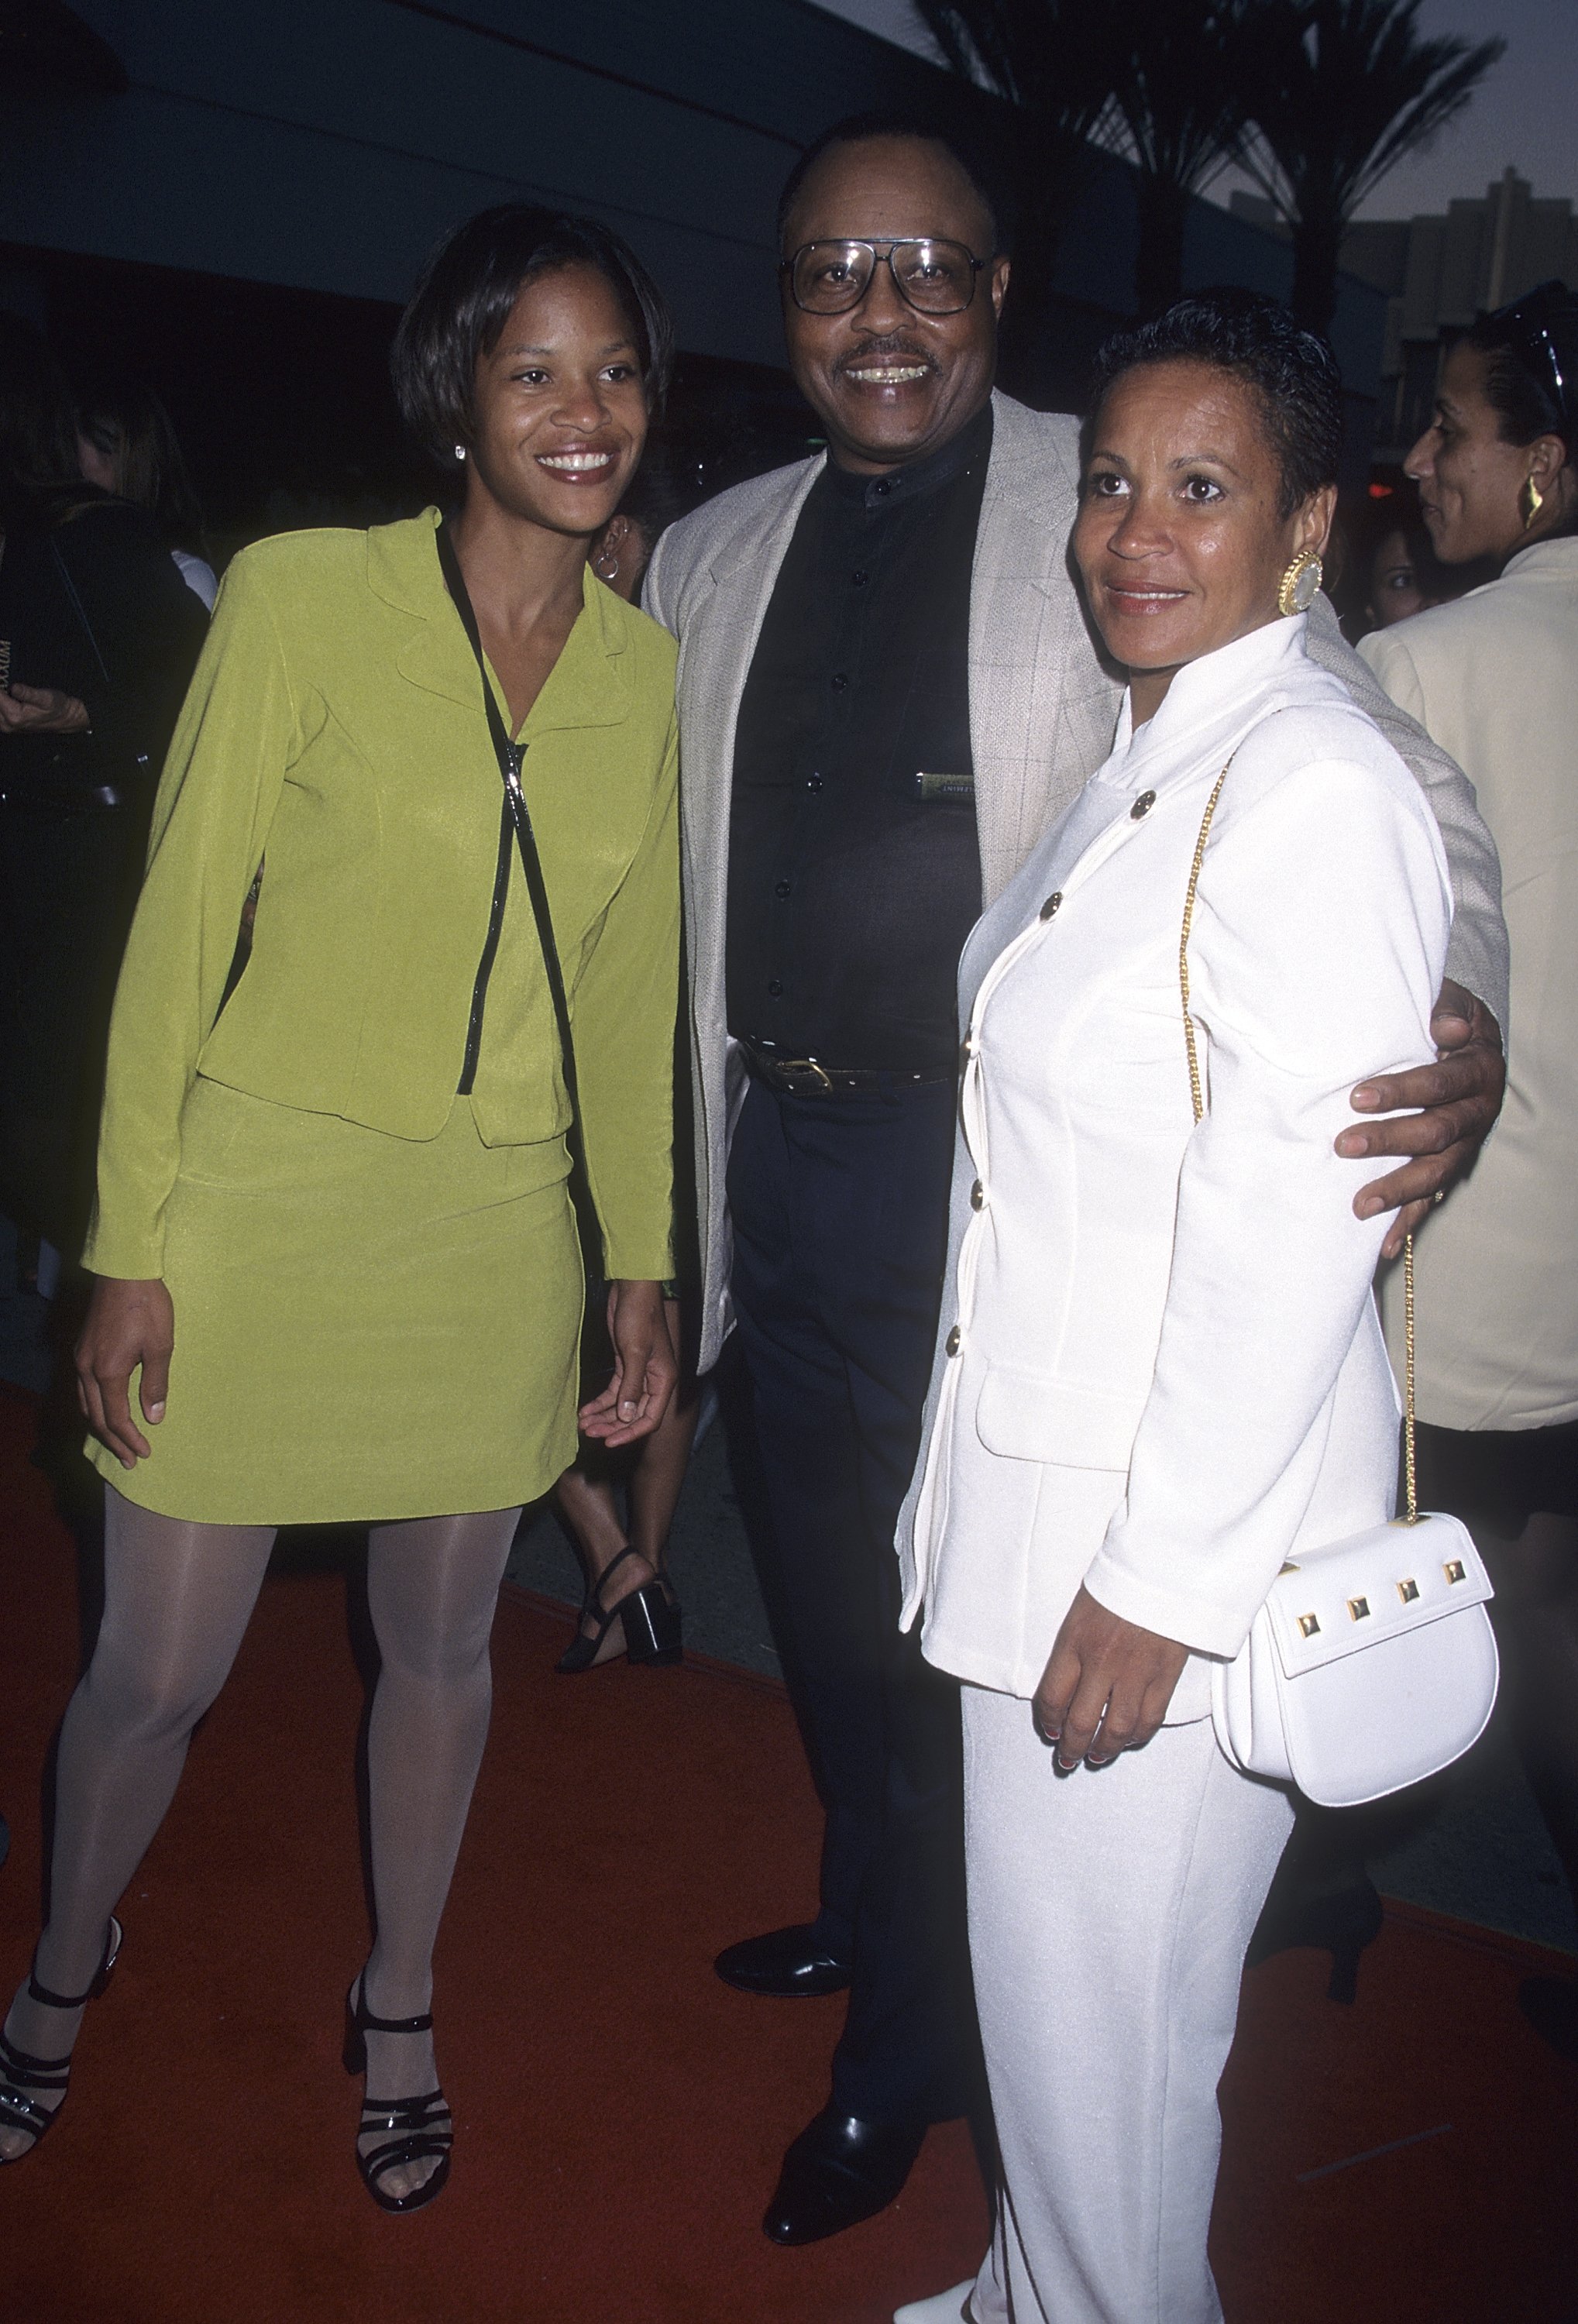 Actor Roger E. Mosley, longtime girlfriend Toni Laudermick, and daughter attend the "Hoodlum" Los Angeles Premiere on August 25, 1997, at the Magic Johnson Theatres in Los Angeles, California | Source: Getty Images.